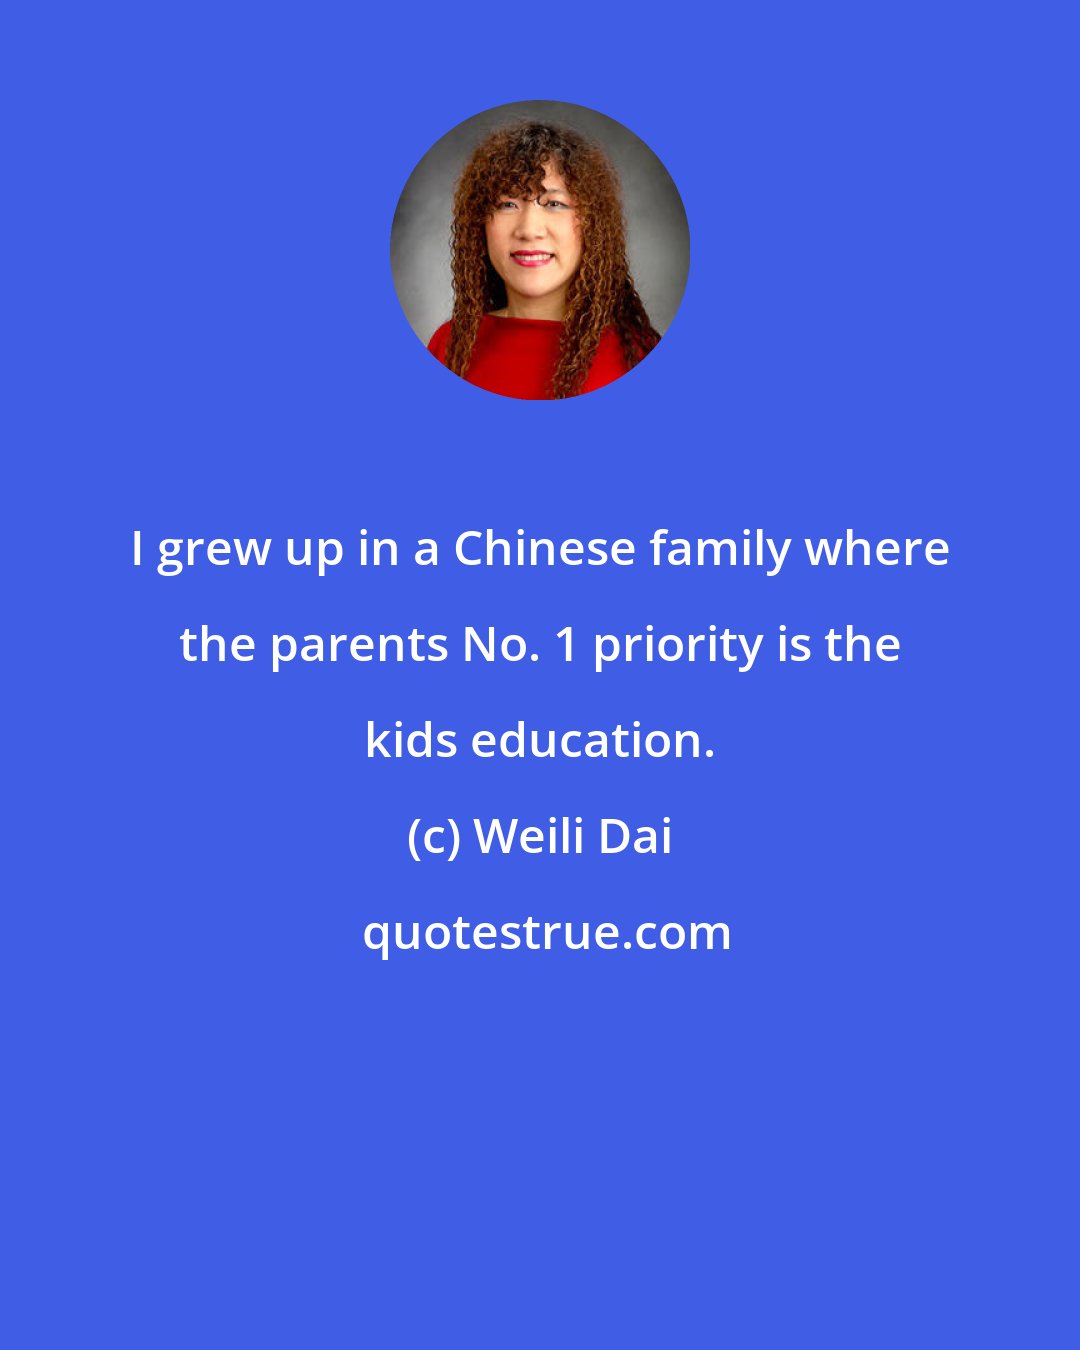 Weili Dai: I grew up in a Chinese family where the parents No. 1 priority is the kids education.